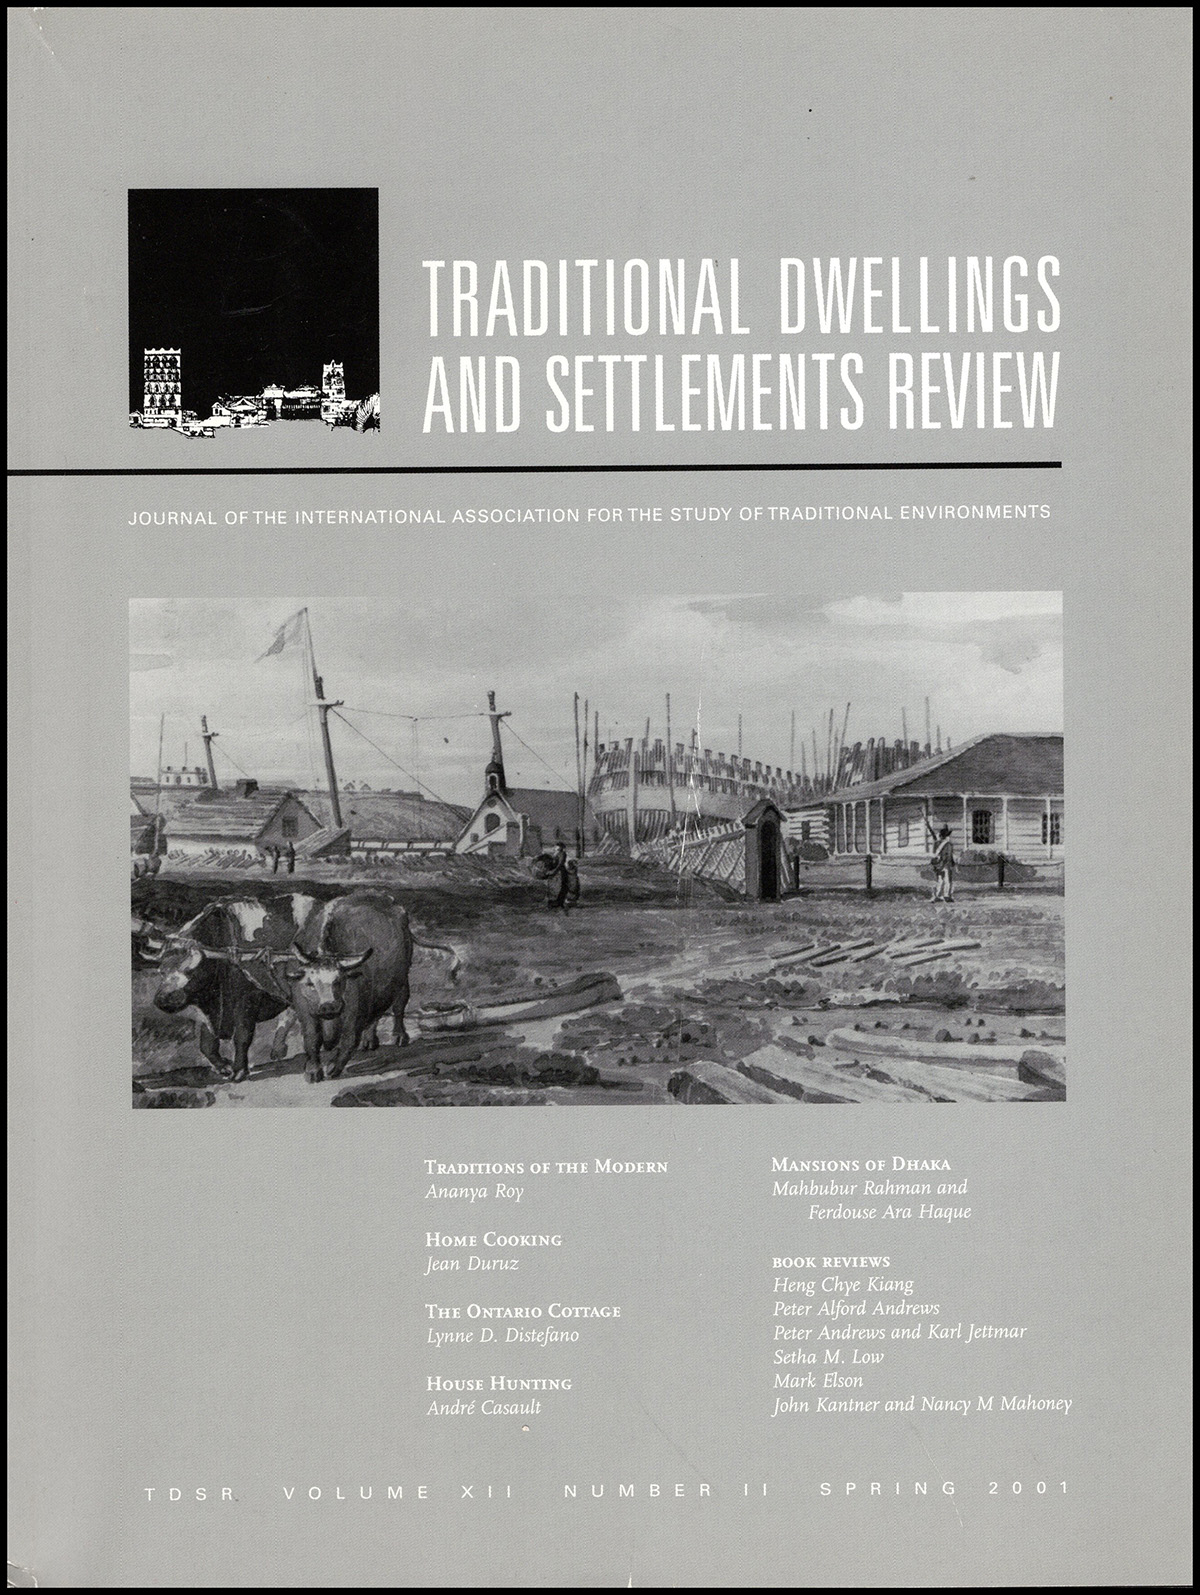 International Association for the Study of Traditional Environments - Traditional Dwellings and Settlements Review (Volume XII, Number 11, Spring 2001)